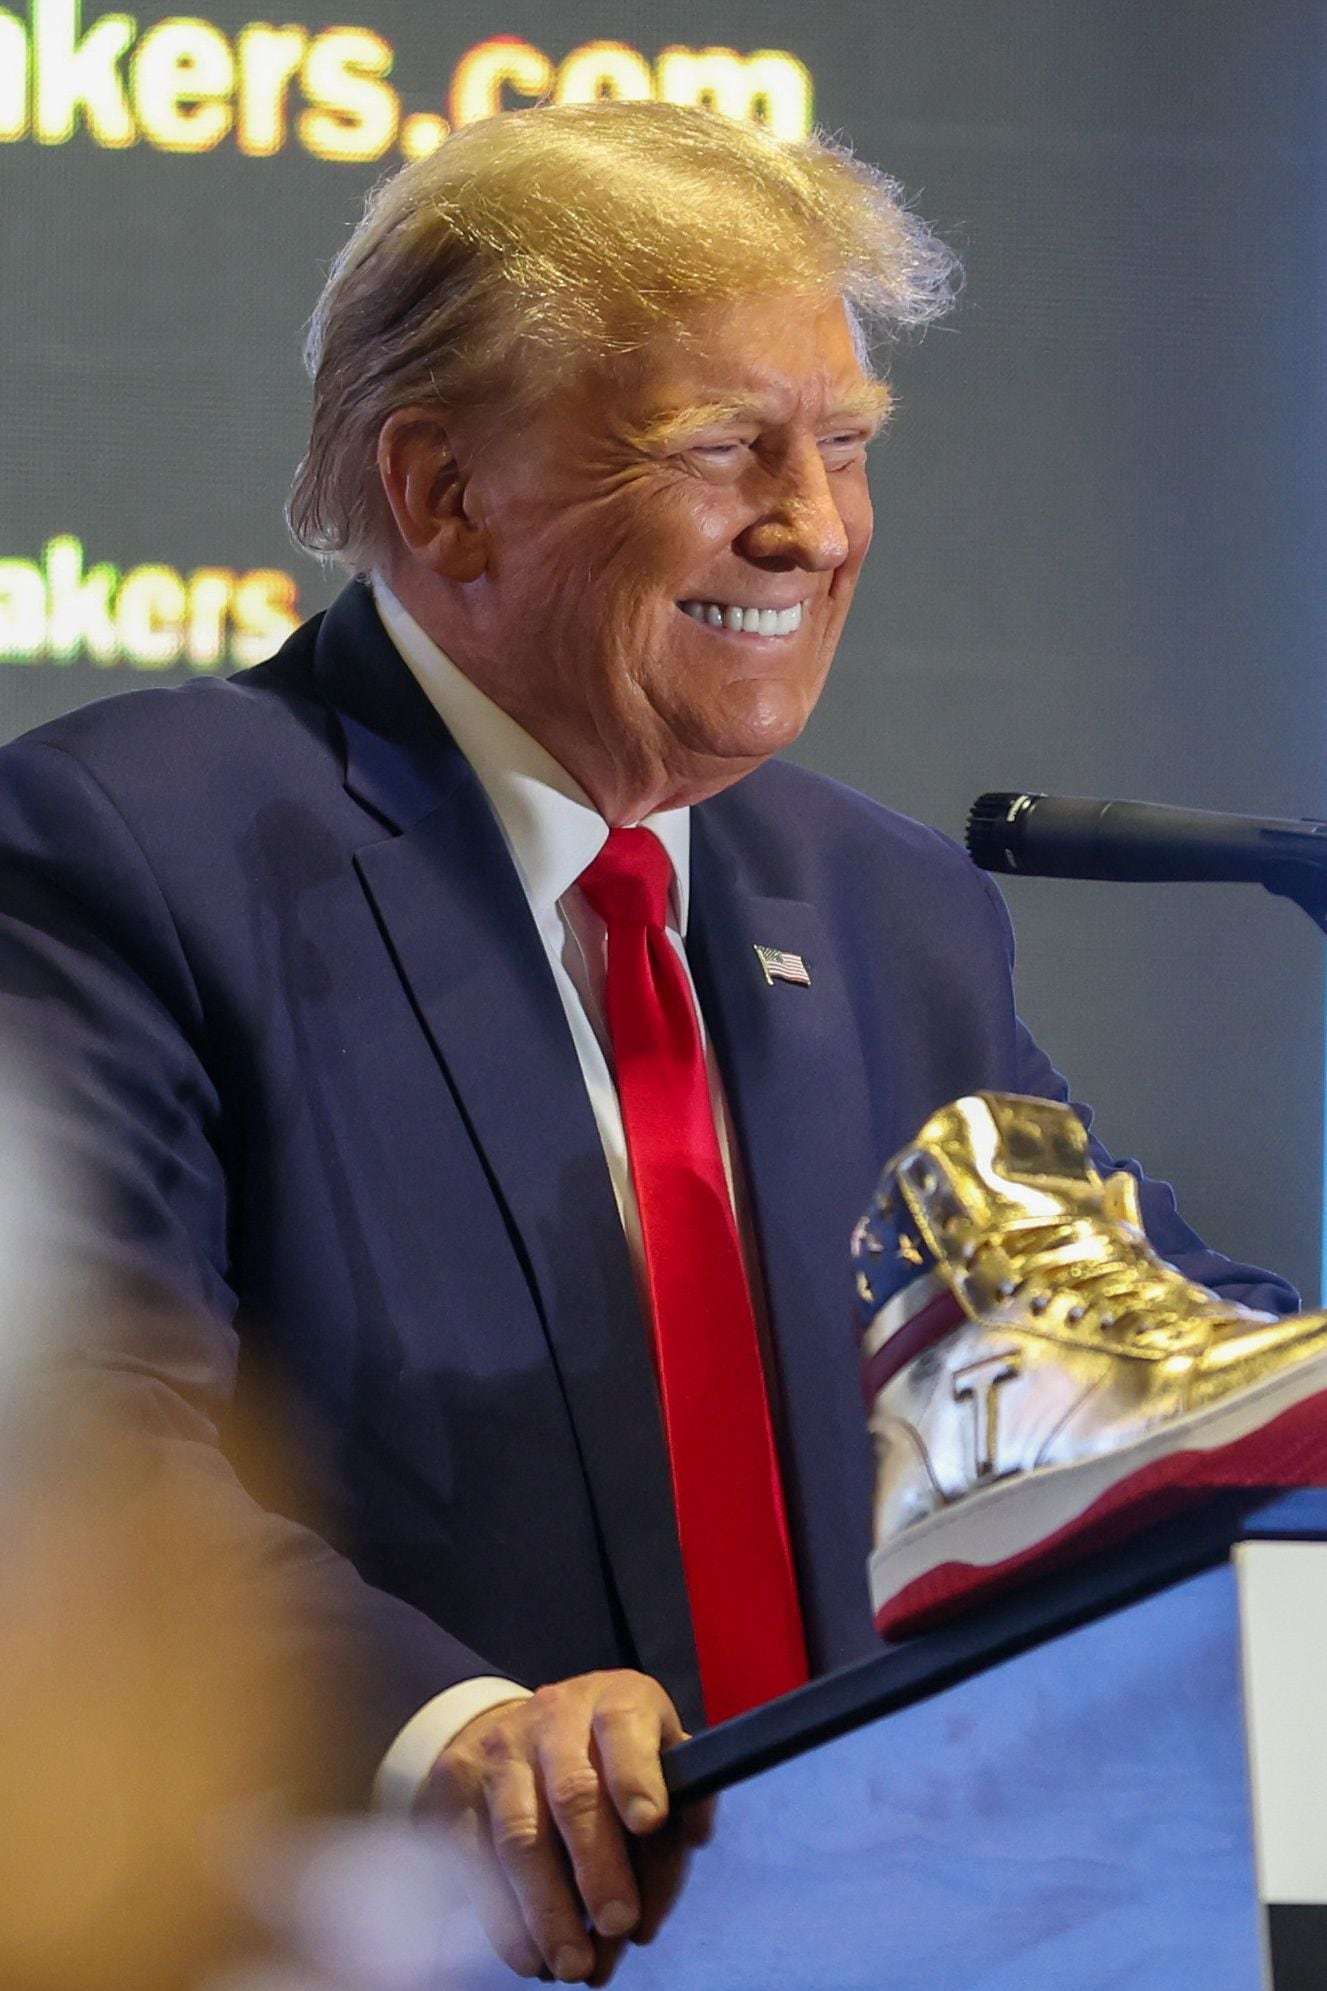 donald trump’s sneaker stunt stole from the black culture he’s vilified